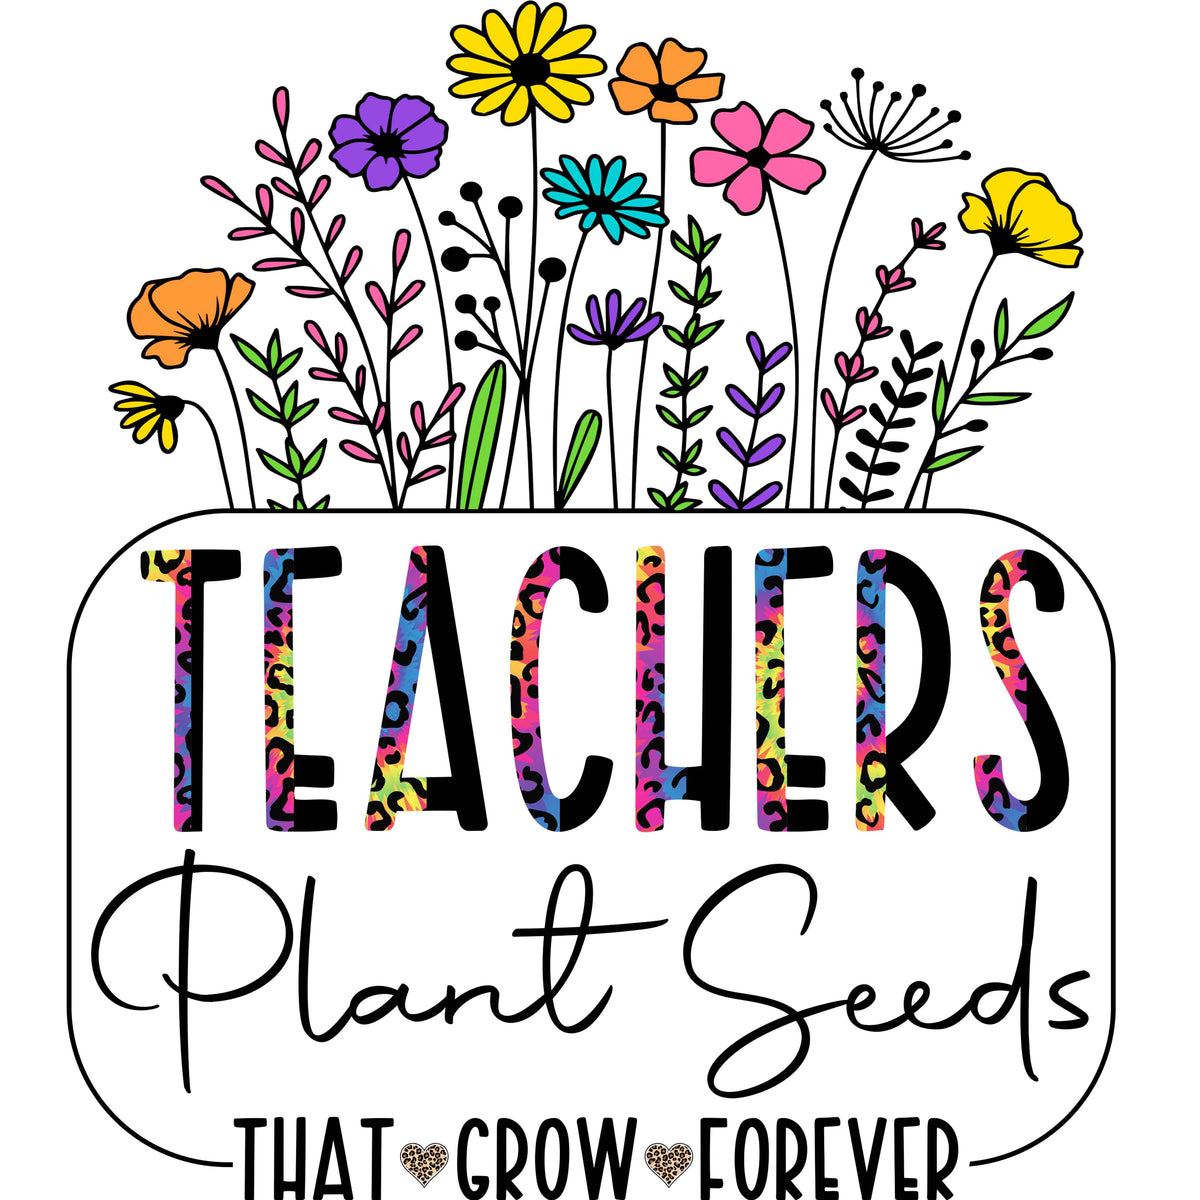 Teachers Plant Seeds that Grow Forever